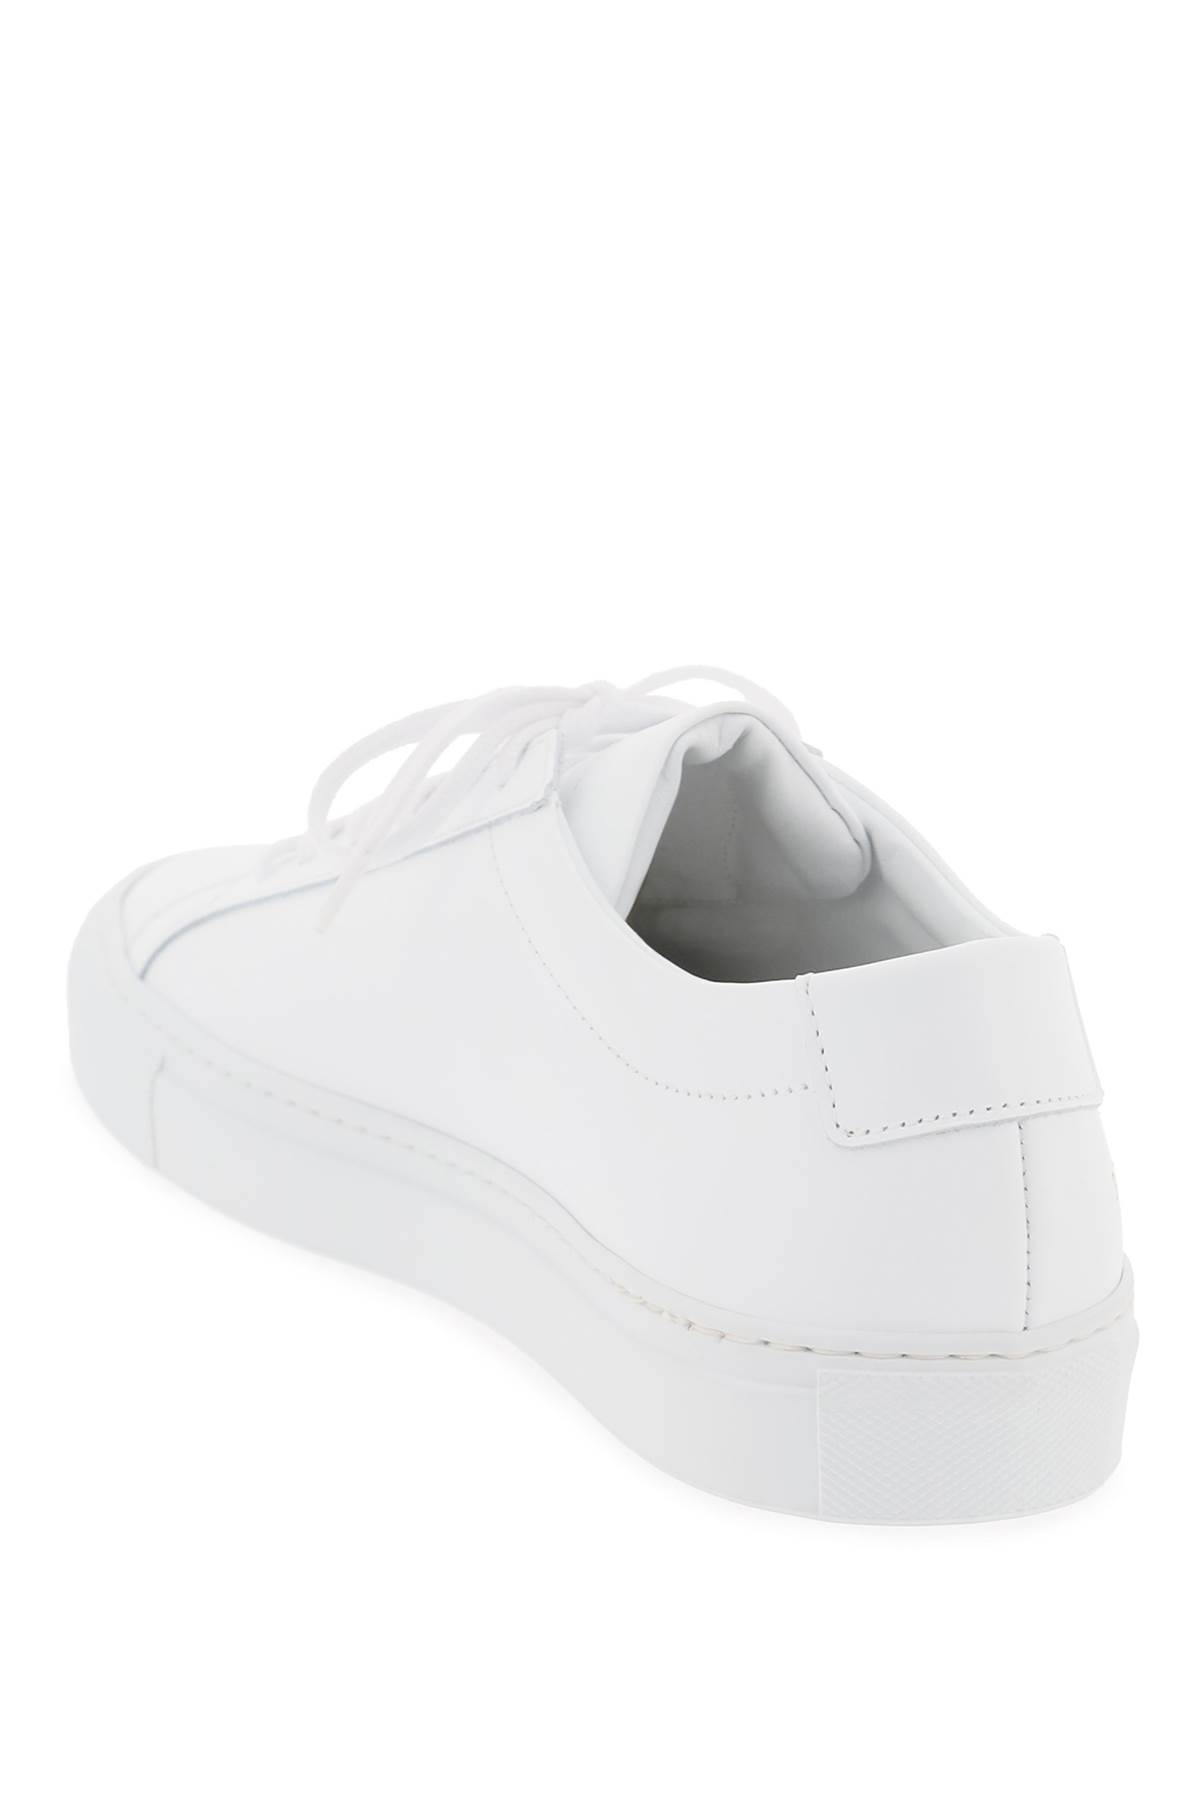 Shop Common Projects Original Achilles Leather Sneakers In White (white)